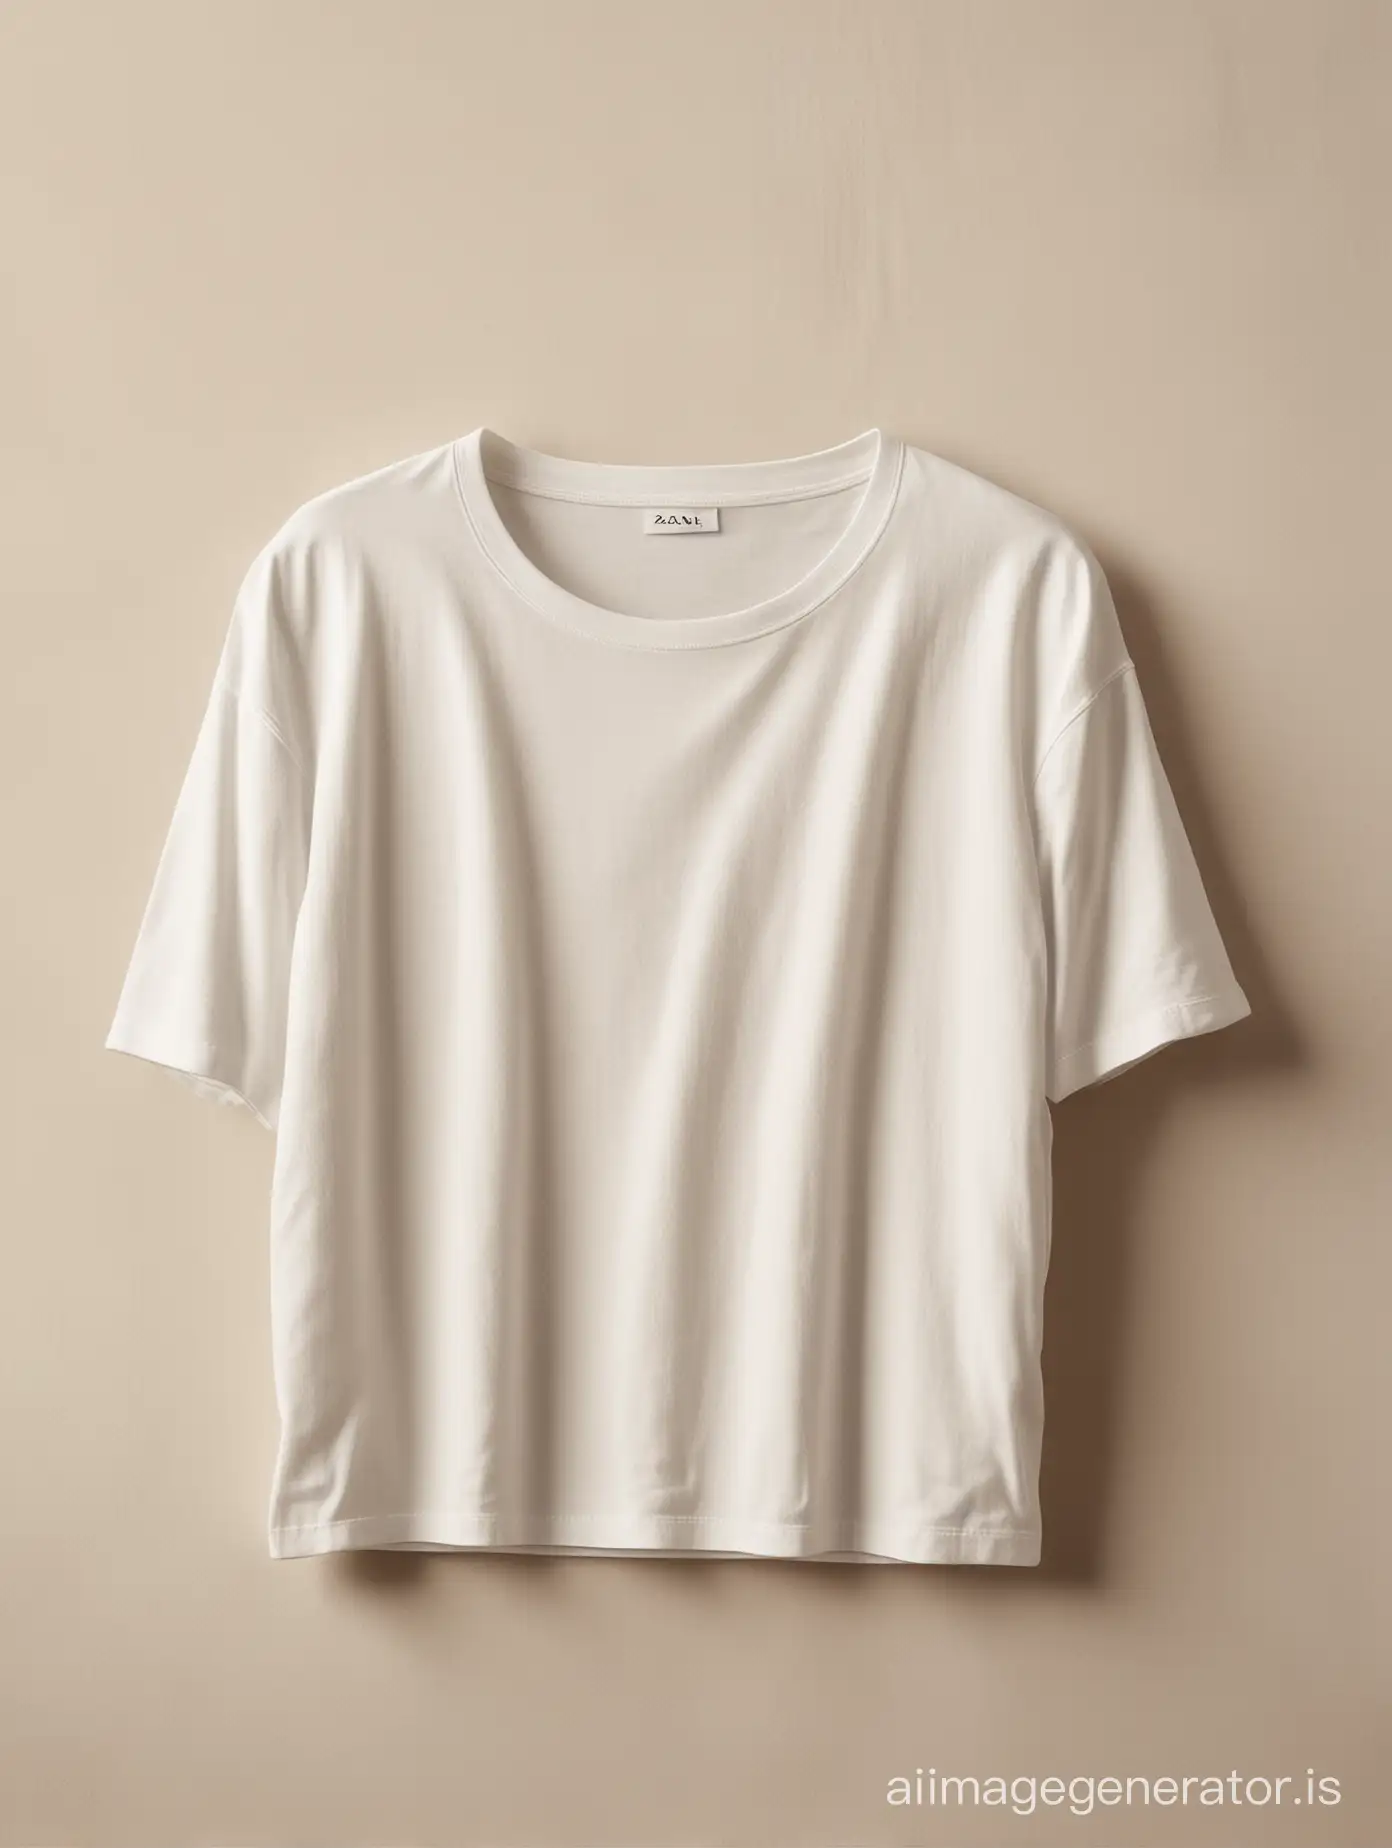 A high-resolution photo of a perfectly folded white cotton t-shirt, styled for a Zara brand catalog. Warm natural sunlight streams in from the left side of the image, highlighting the rich texture and subtle imperfections of the natural fabric. The t-shirt should be meticulously folded into a crisp square, with sharp edges and no wrinkles or imperfections. Imagine the fold as a series of precise rectangles stacked upon each other, creating a flawless geometric form. Maintain a minimalist, clean background for a polished look.